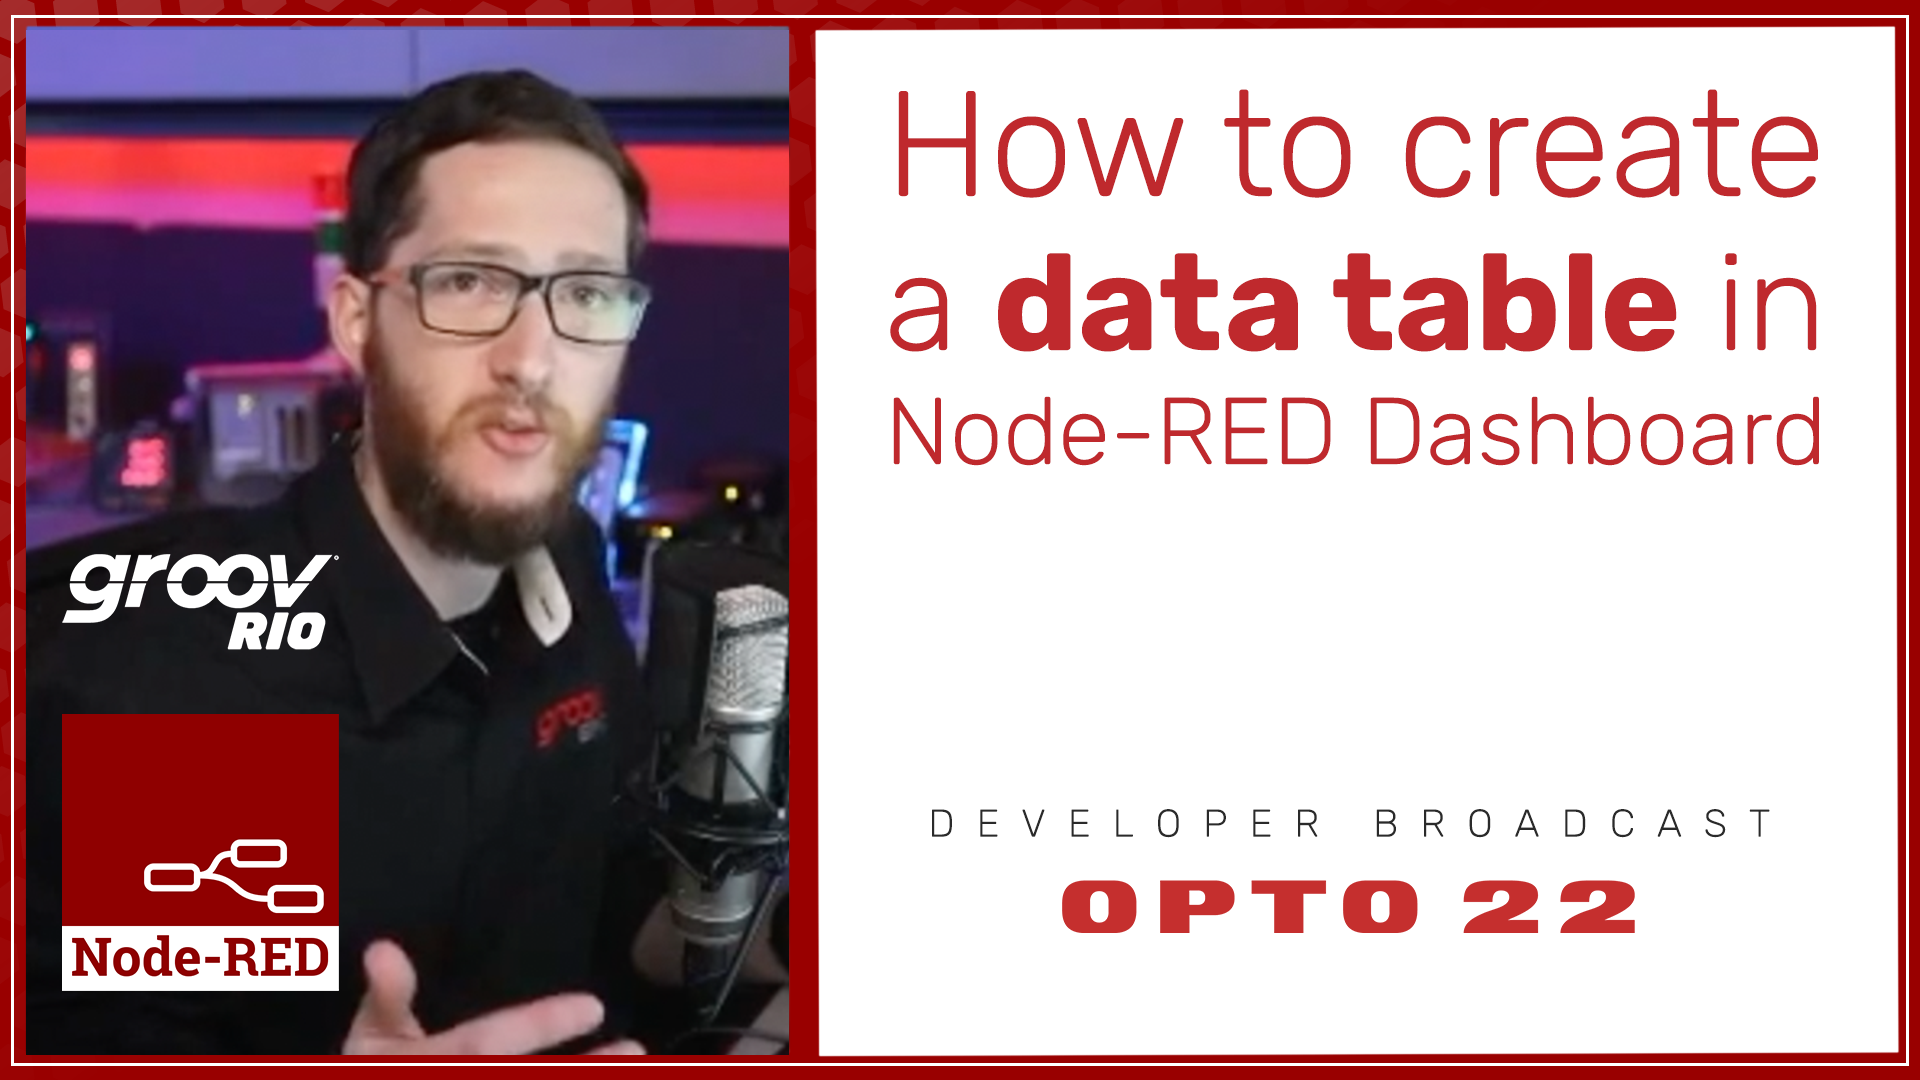 Create a data table in Node-RED